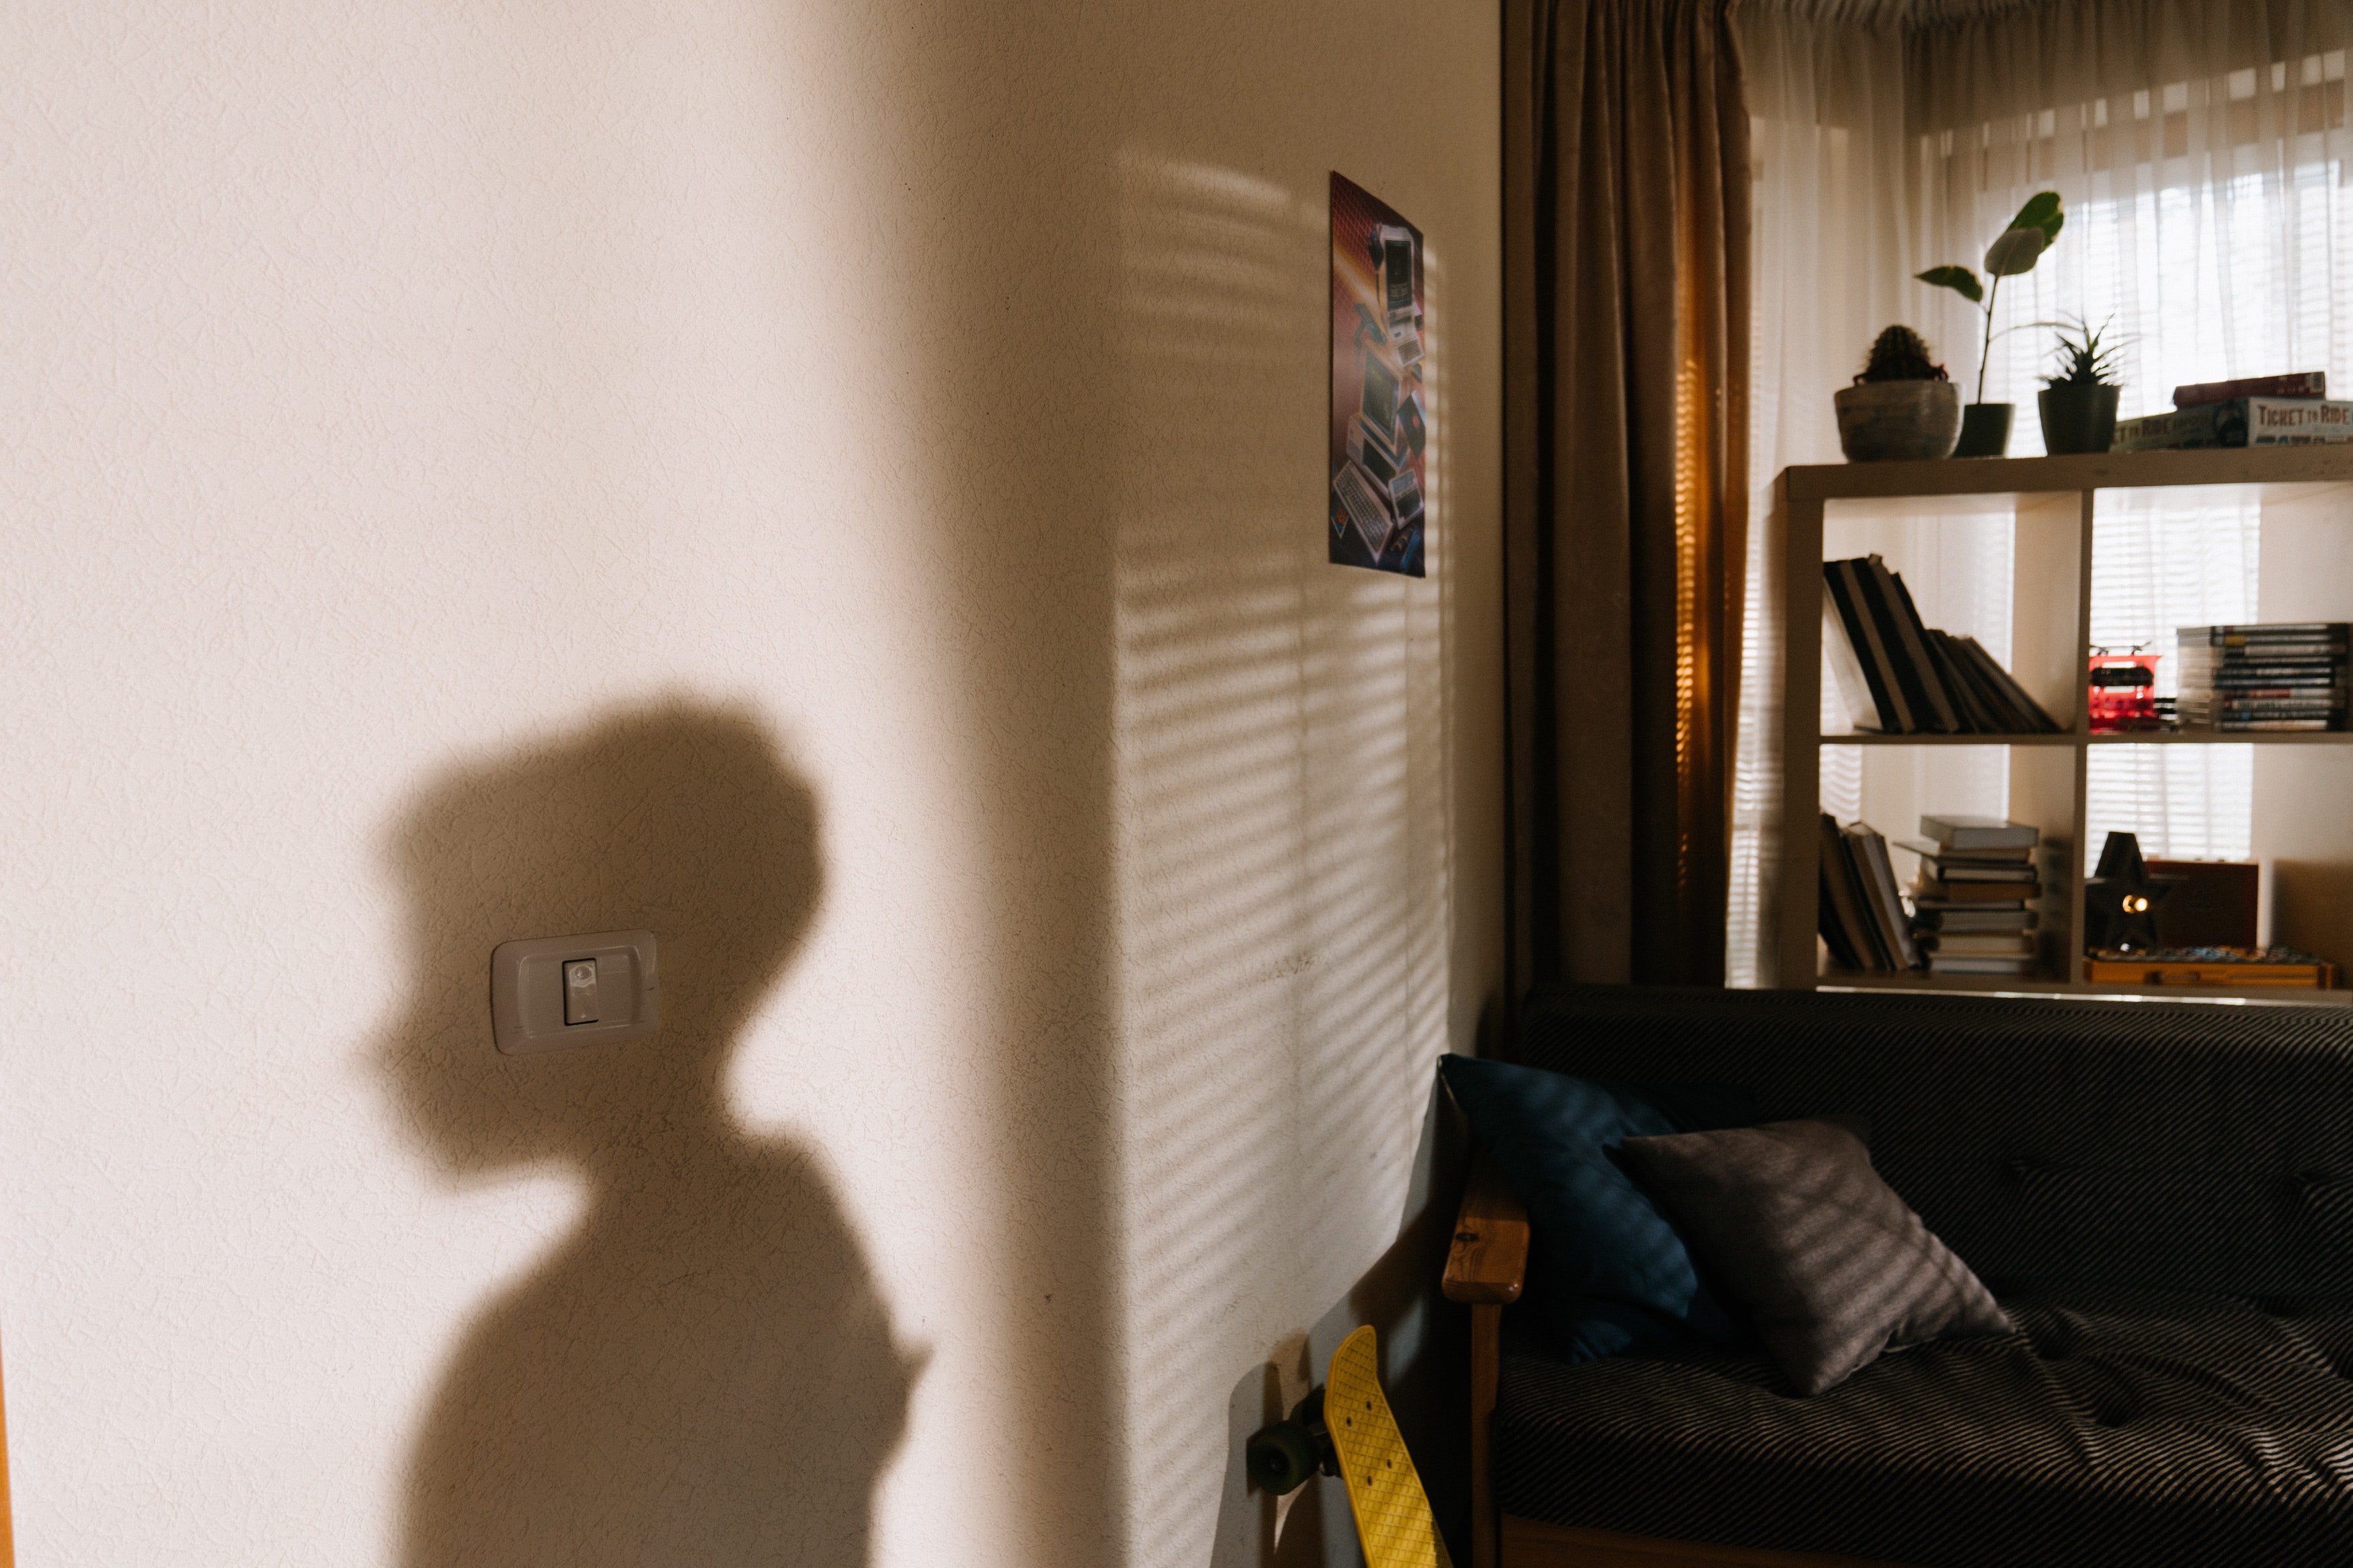 Stan snuck out of his bedroom through the window, assuming his mom had returned to her room. | Source: Pexels